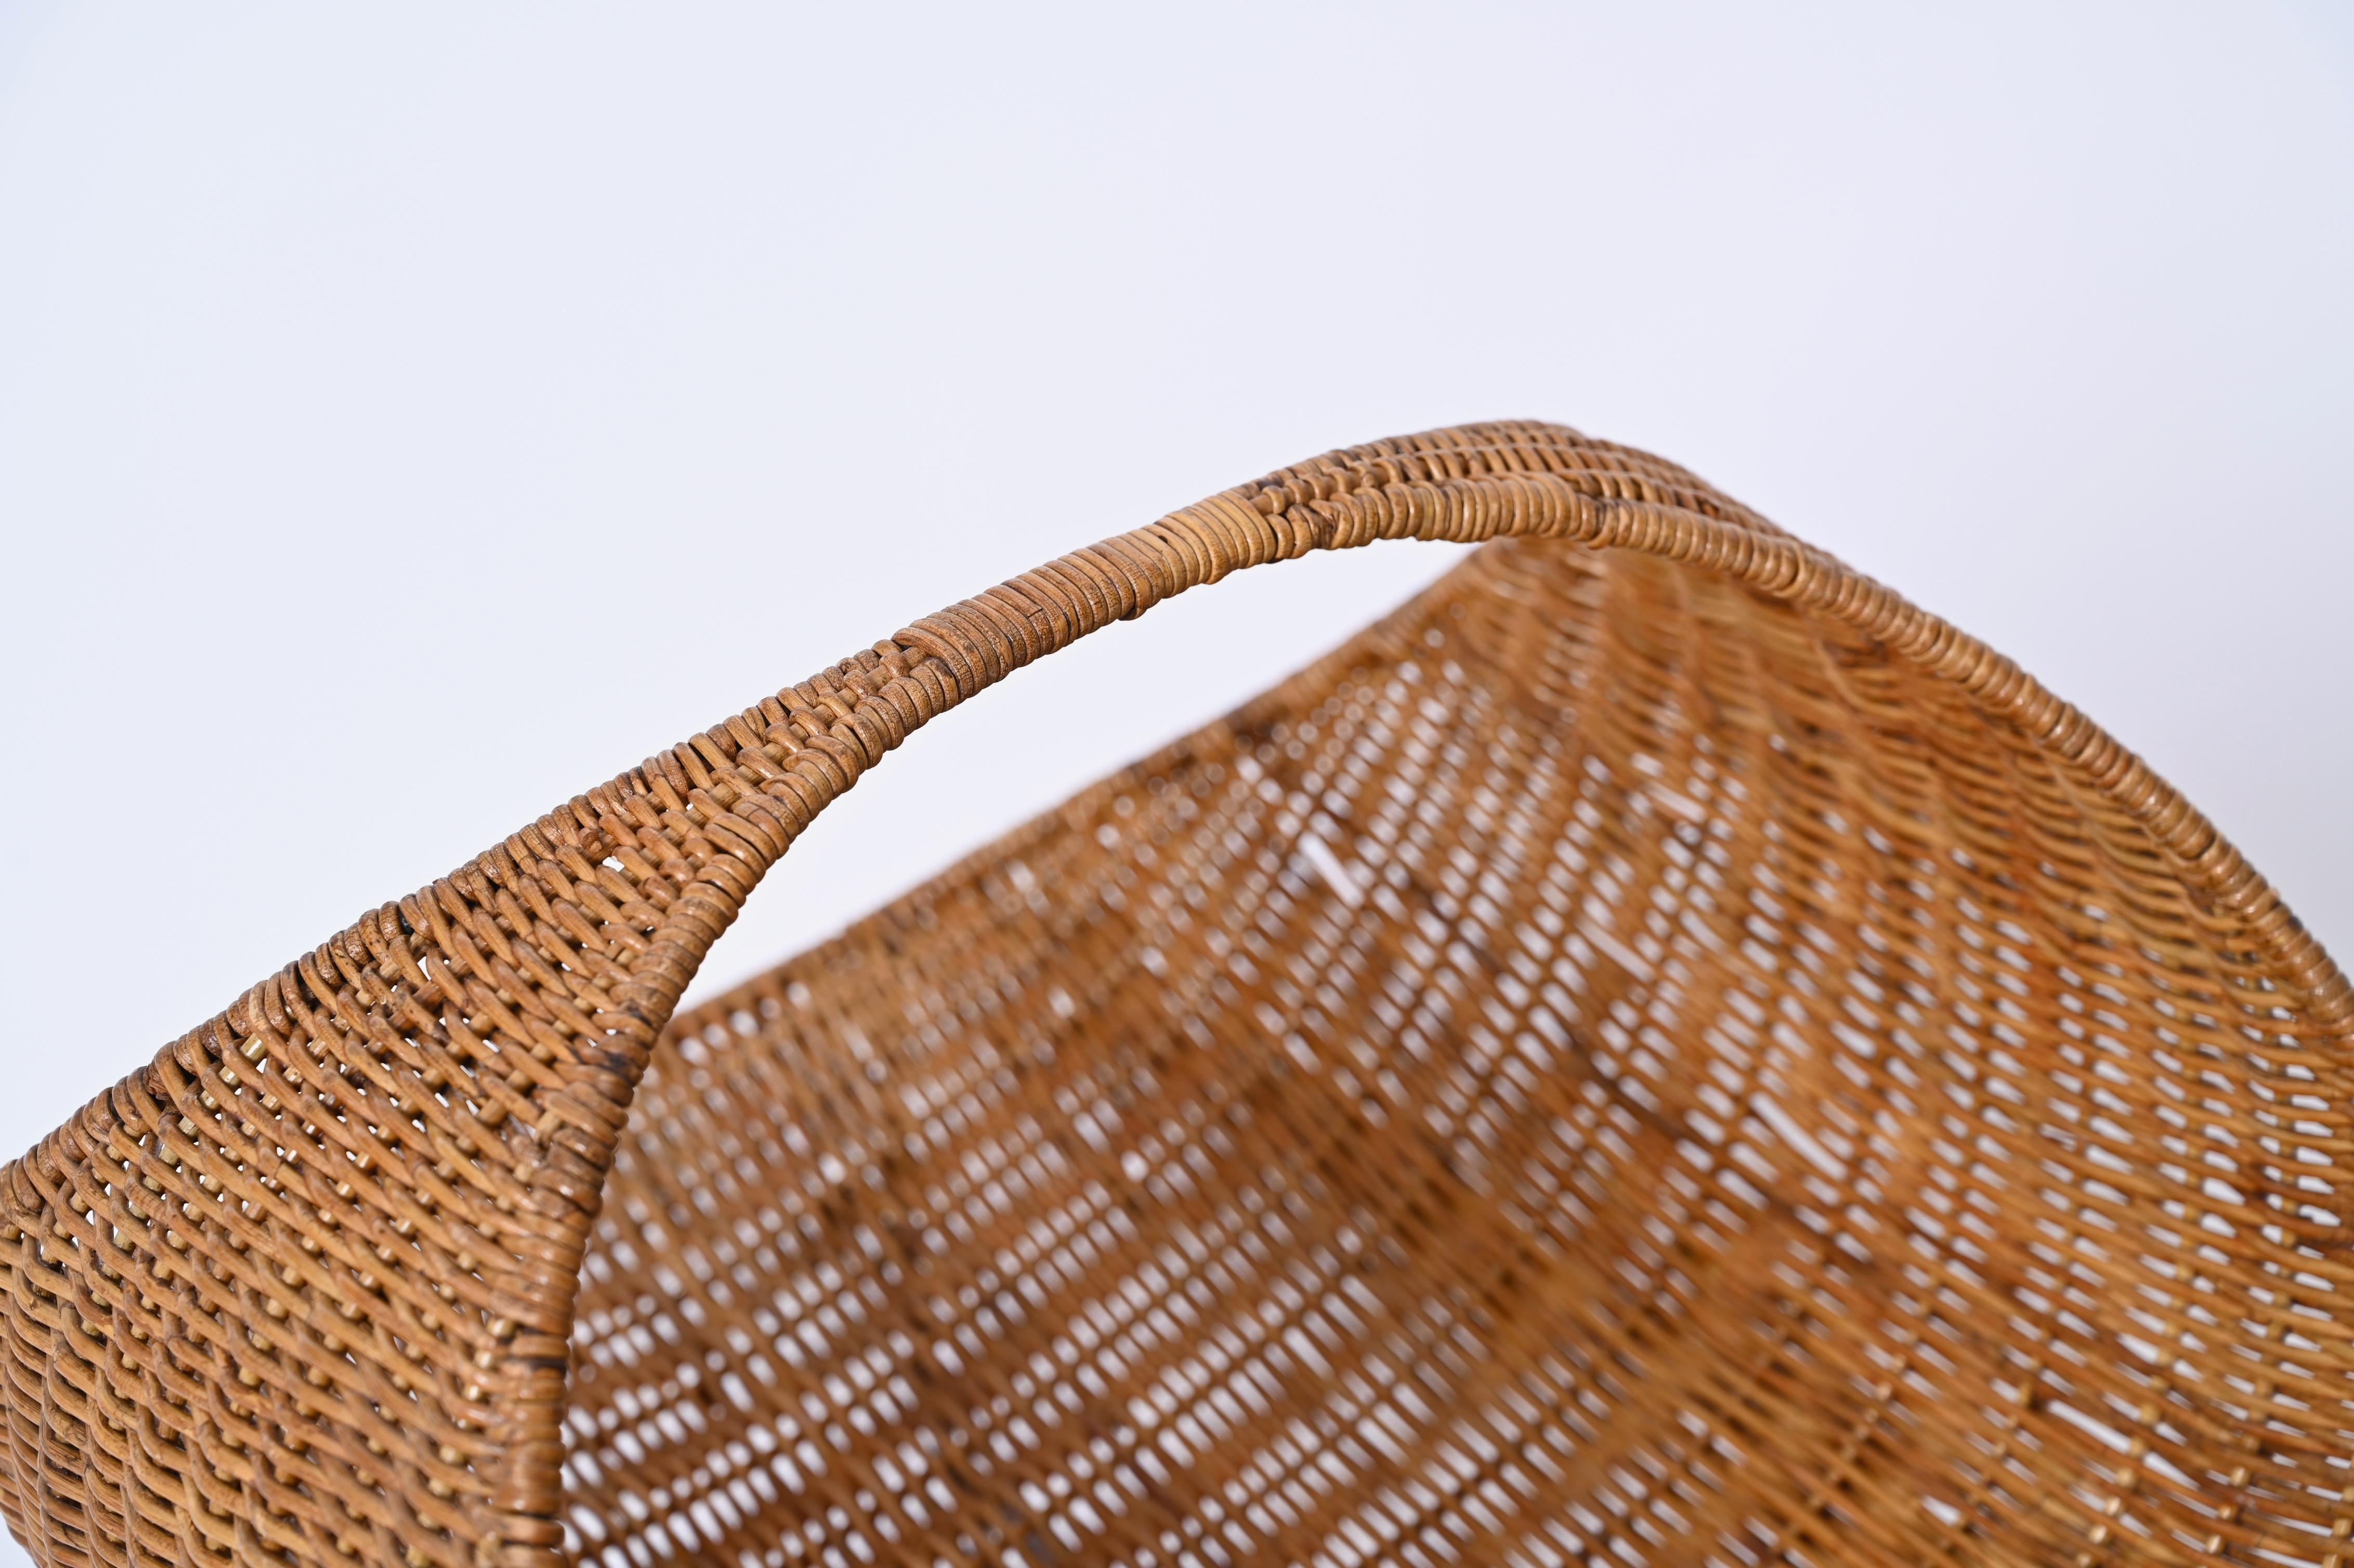 Rattan Campo & Graffi Magazine Rack in Wicker and Black Enameled Iron, Italy 1950s For Sale